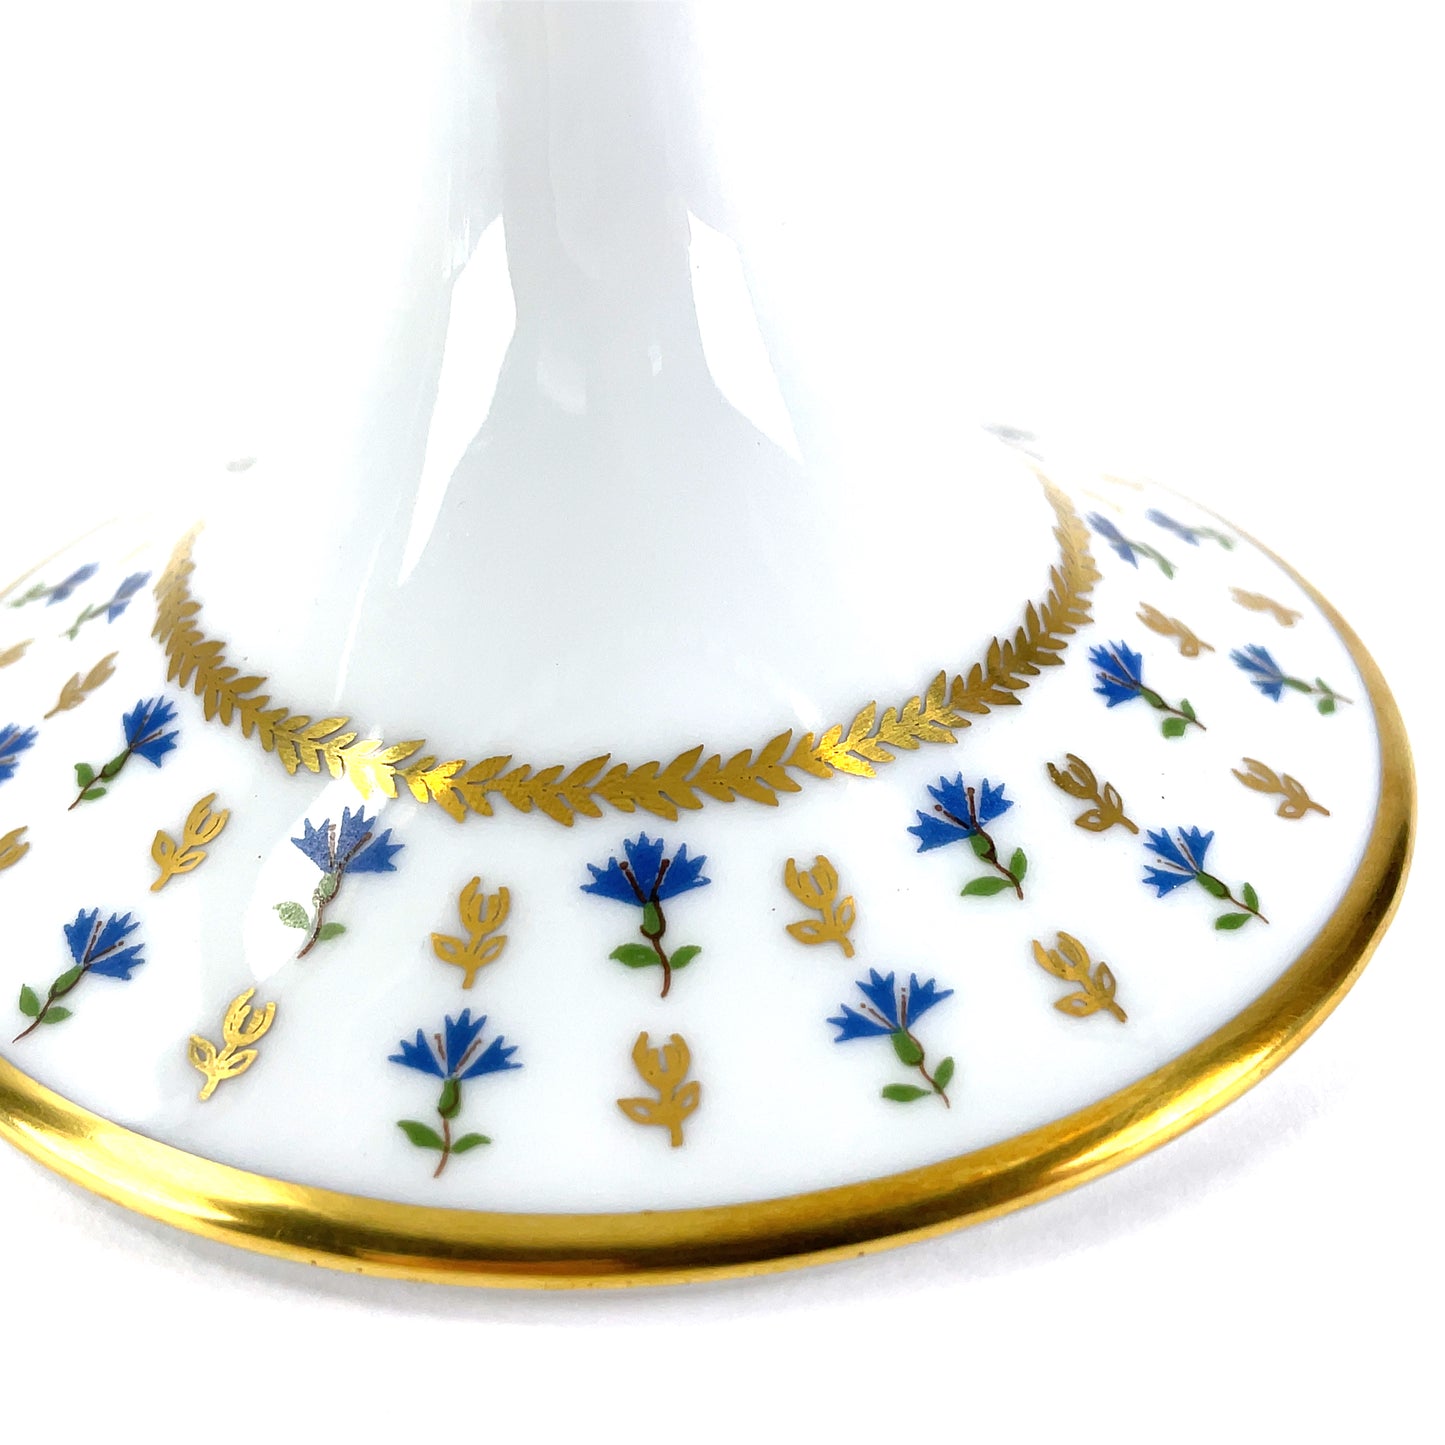 Limoges France Raynaud Vieux Nyon Nyon by Ceralene Cake Stand / Fruit Bowl Discontinued